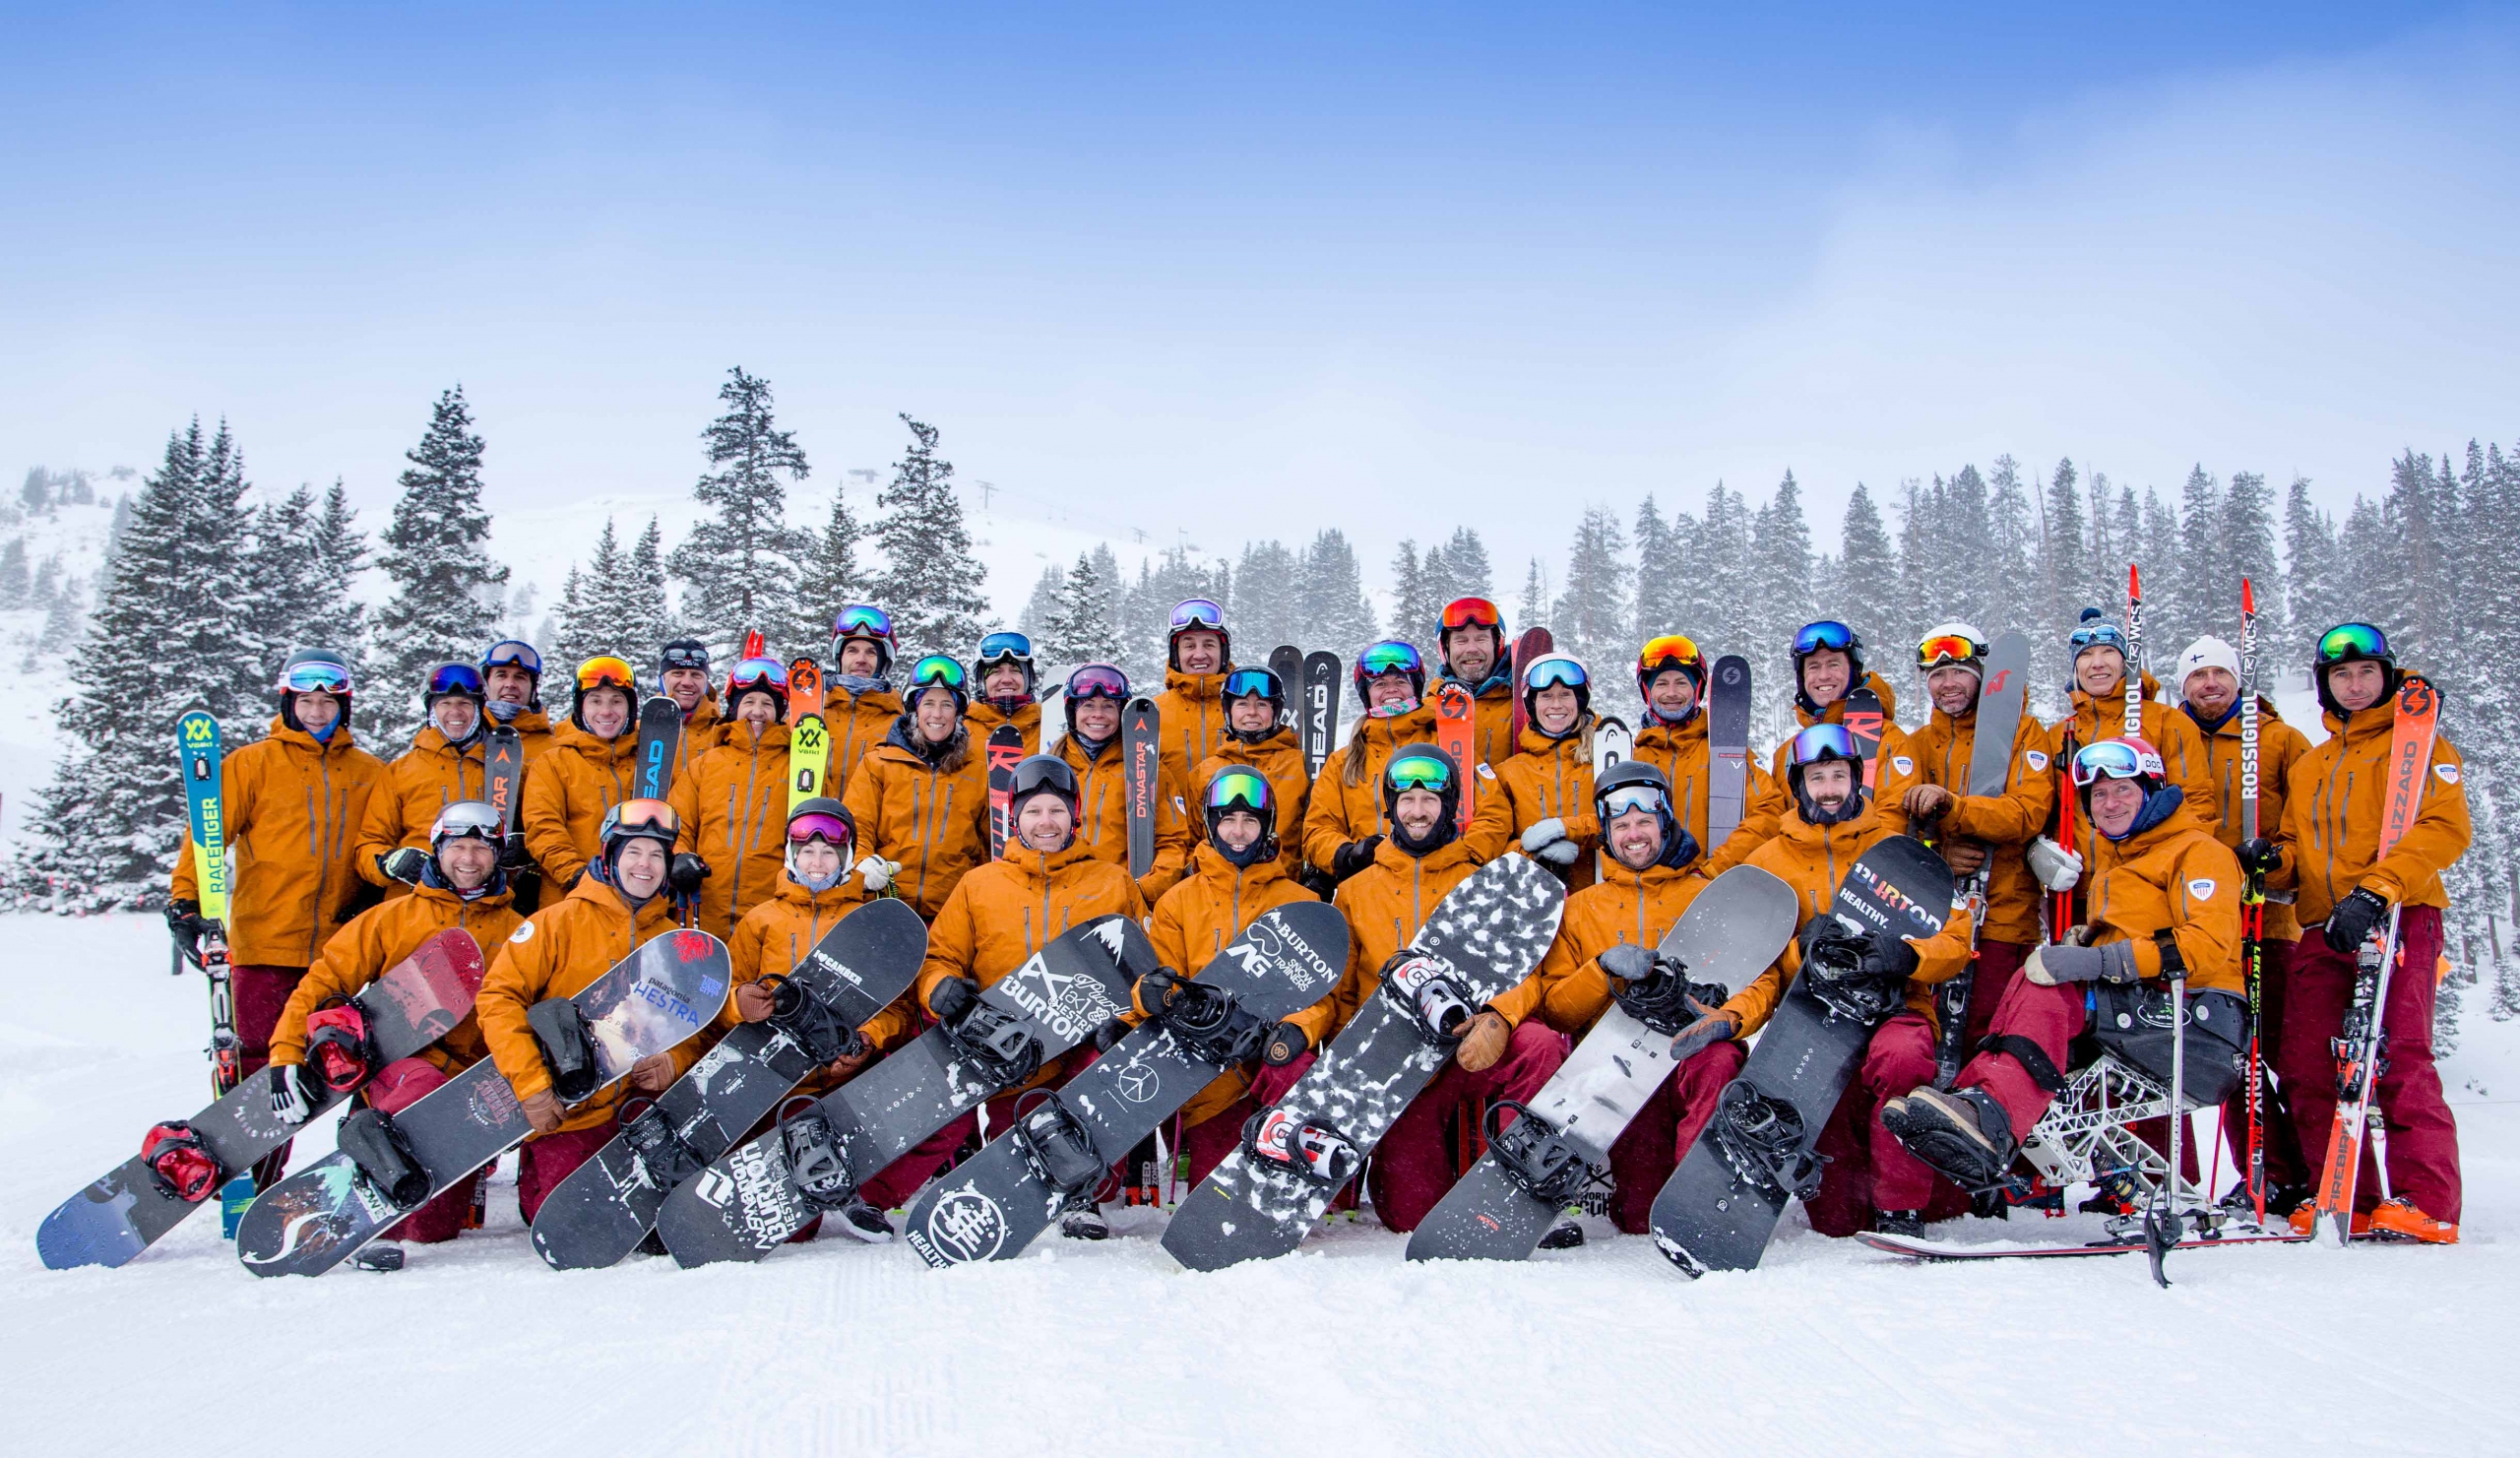 The PSIA-AASI National Team Photo at A-Basin in Fall 2019